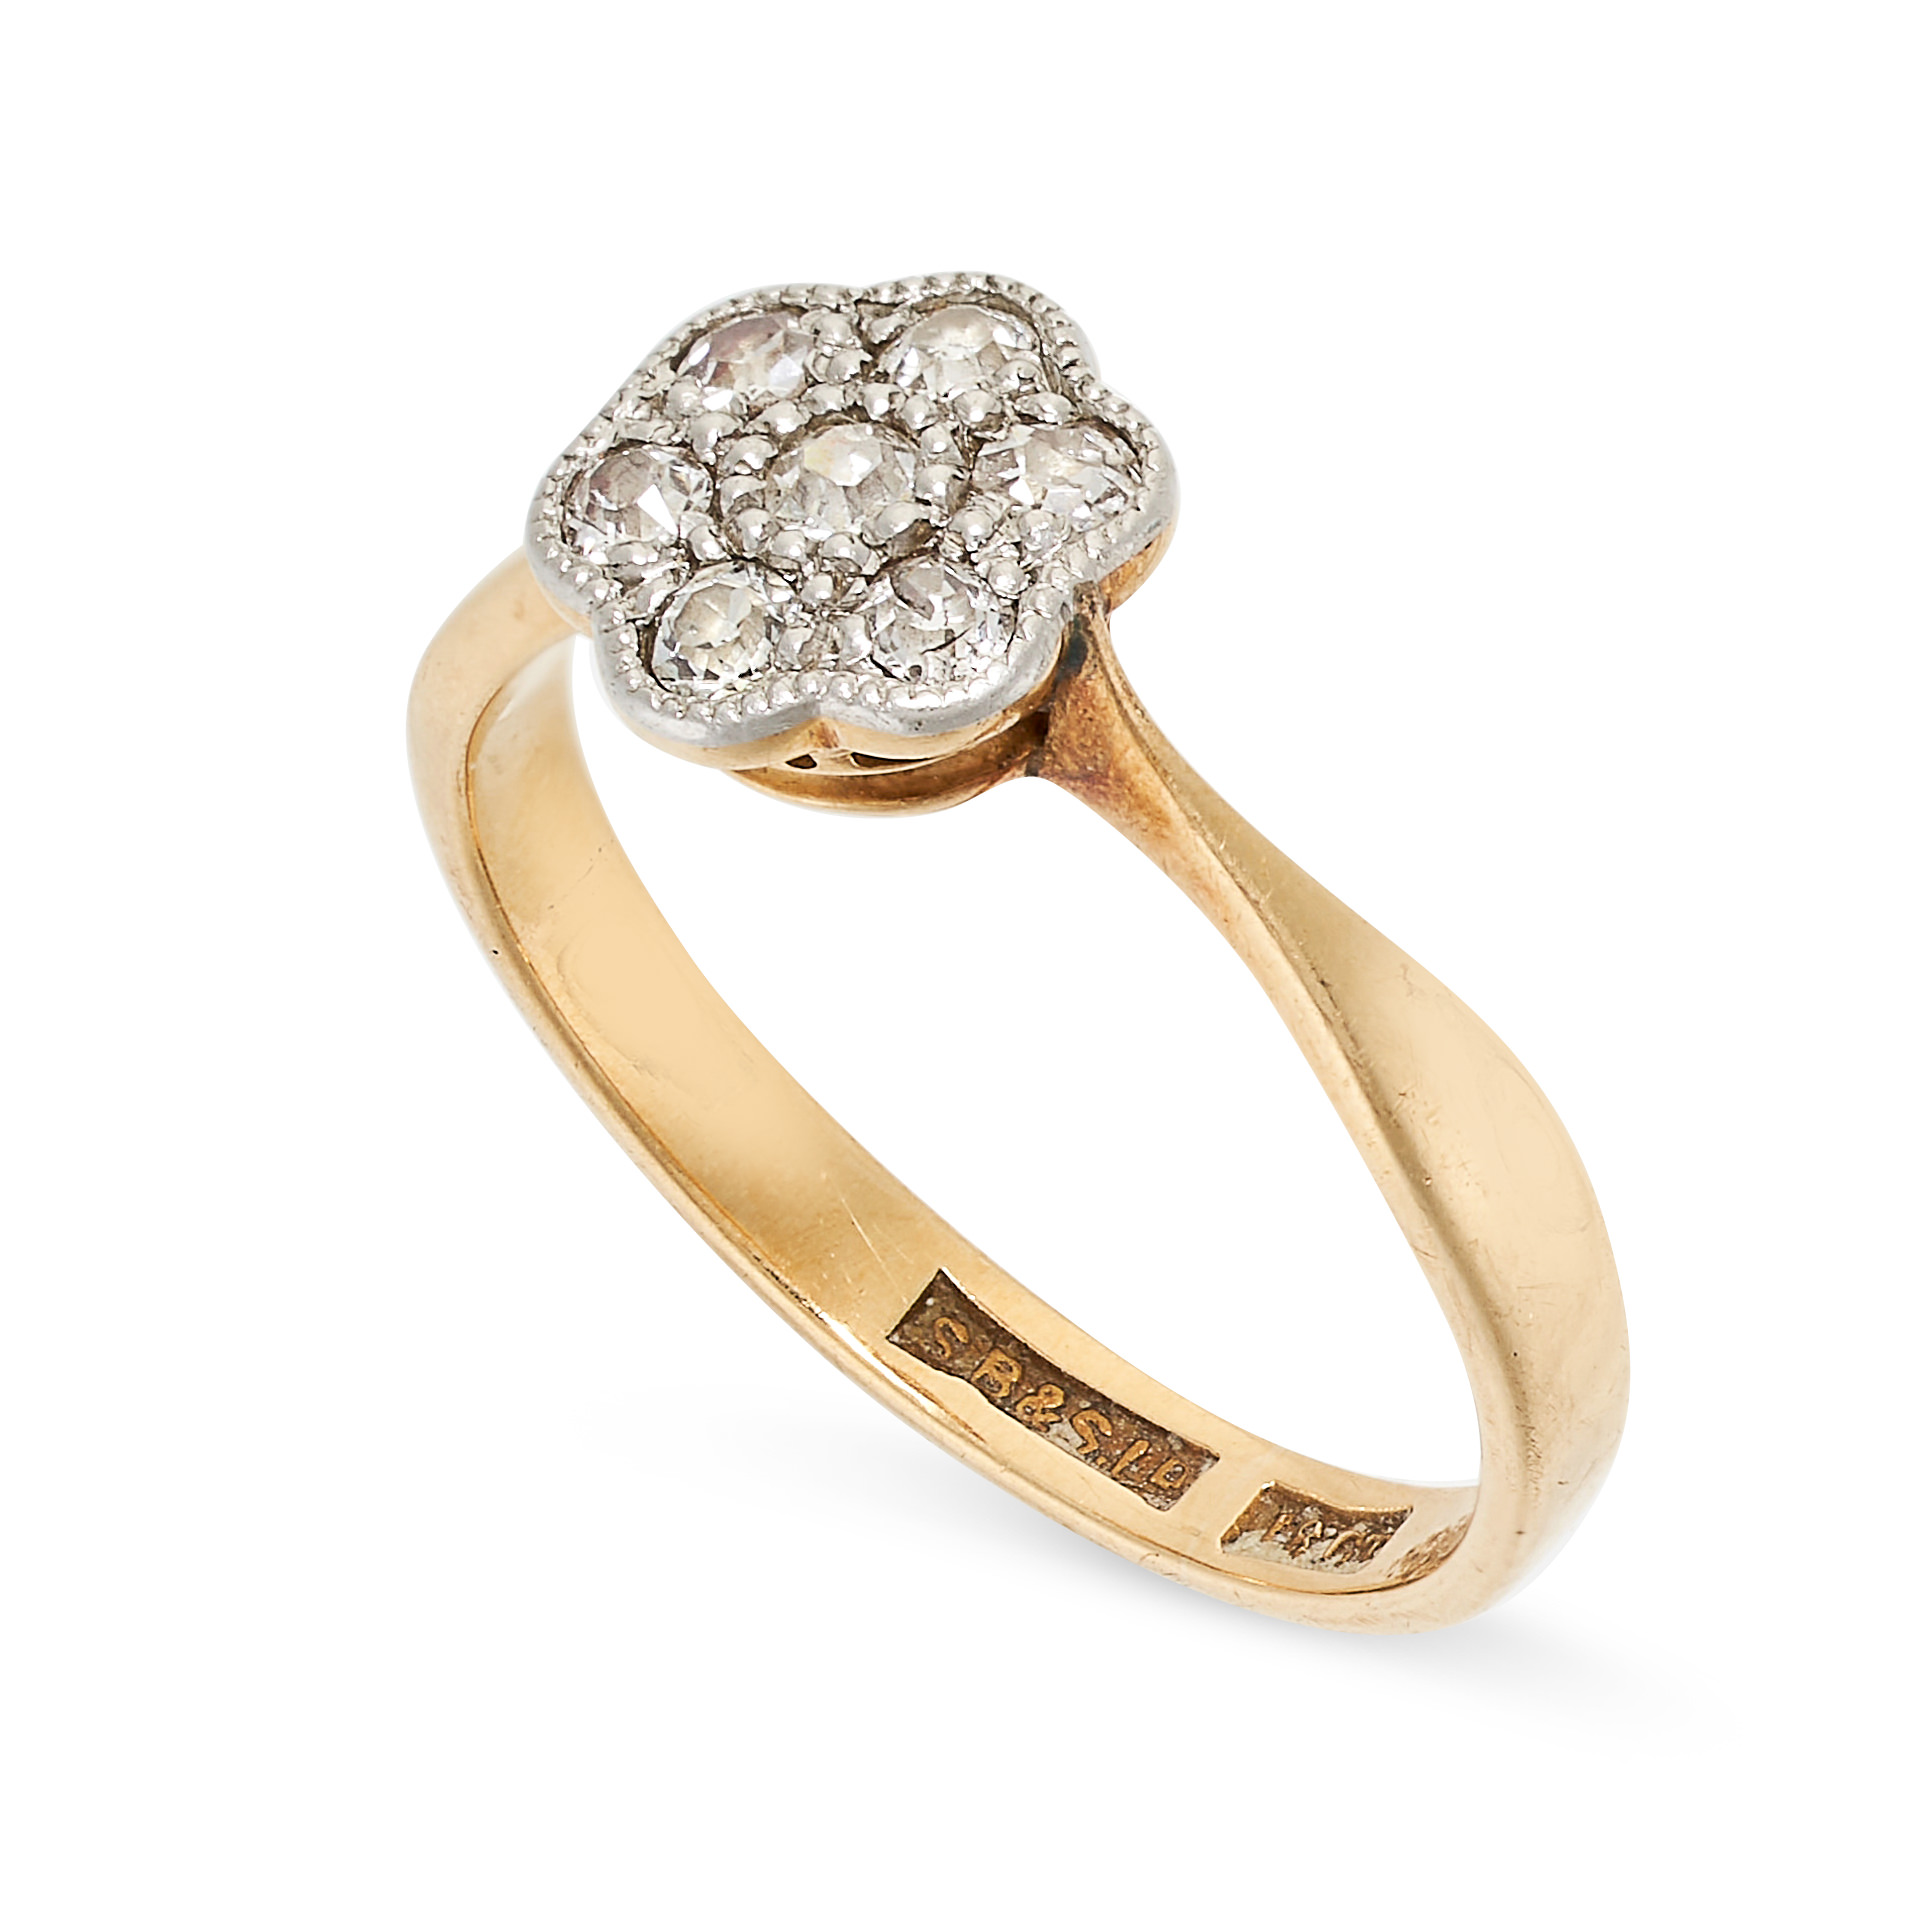 NO RESERVE - AN ANTIQUE DIAMOND CLUSTER RING in 18ct yellow gold and platinum, set with a cluster of - Image 2 of 3